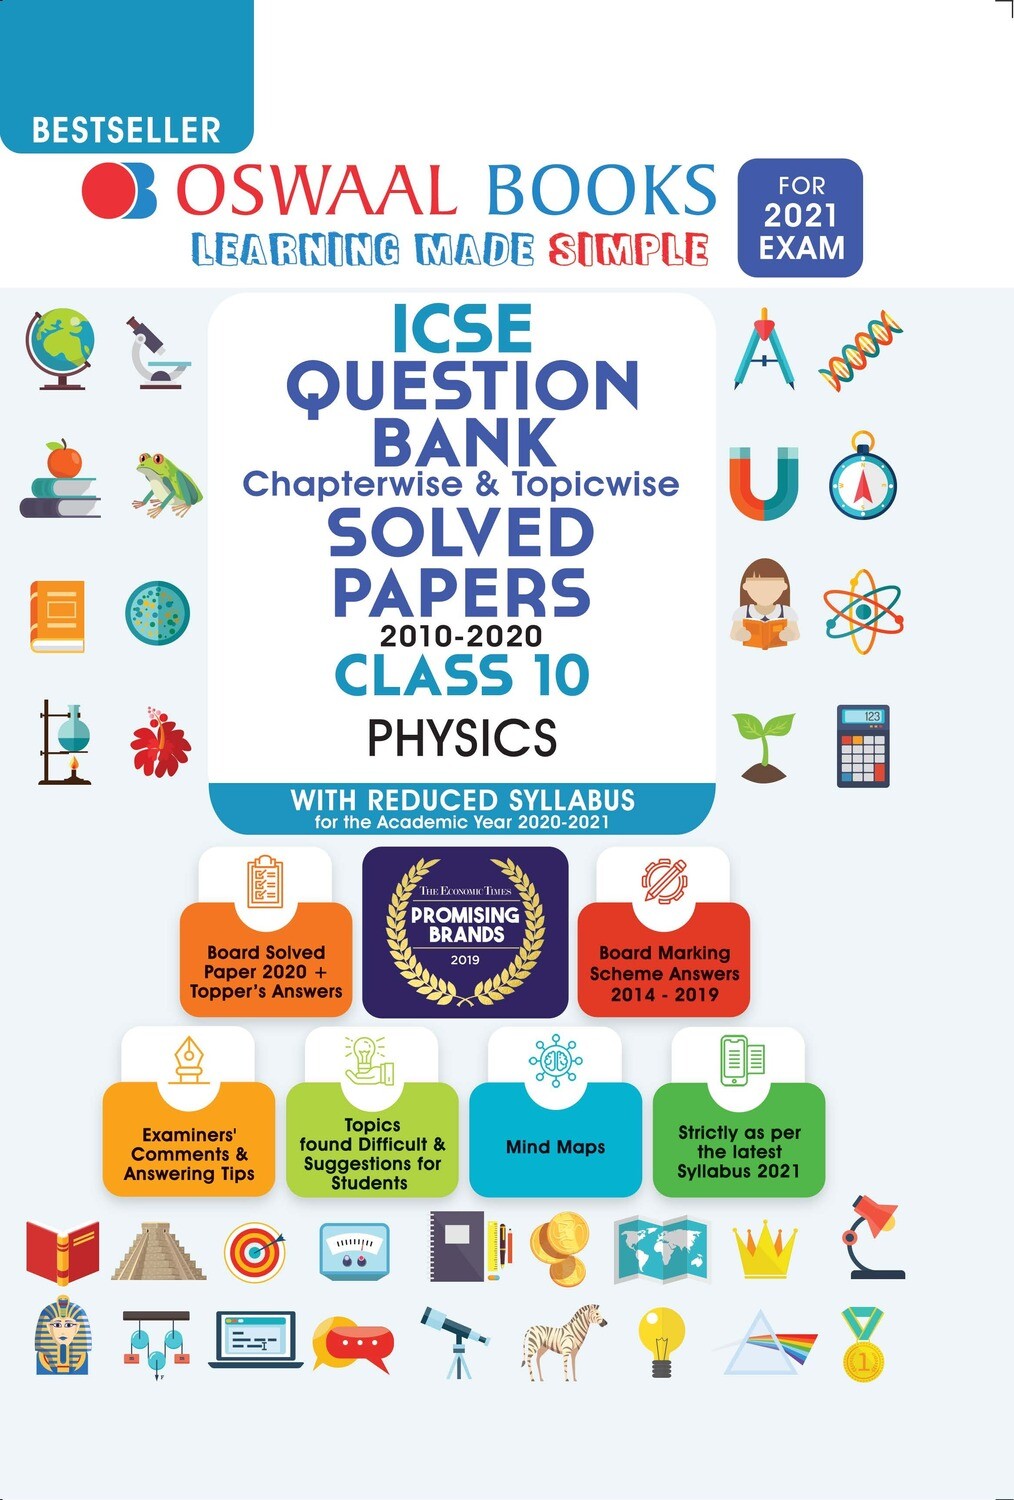 Buy e-book: Oswaal ICSE Question Bank Chapterwise & Topicwise Solved Papers, Physics, Class 10 (Reduced Syllabus